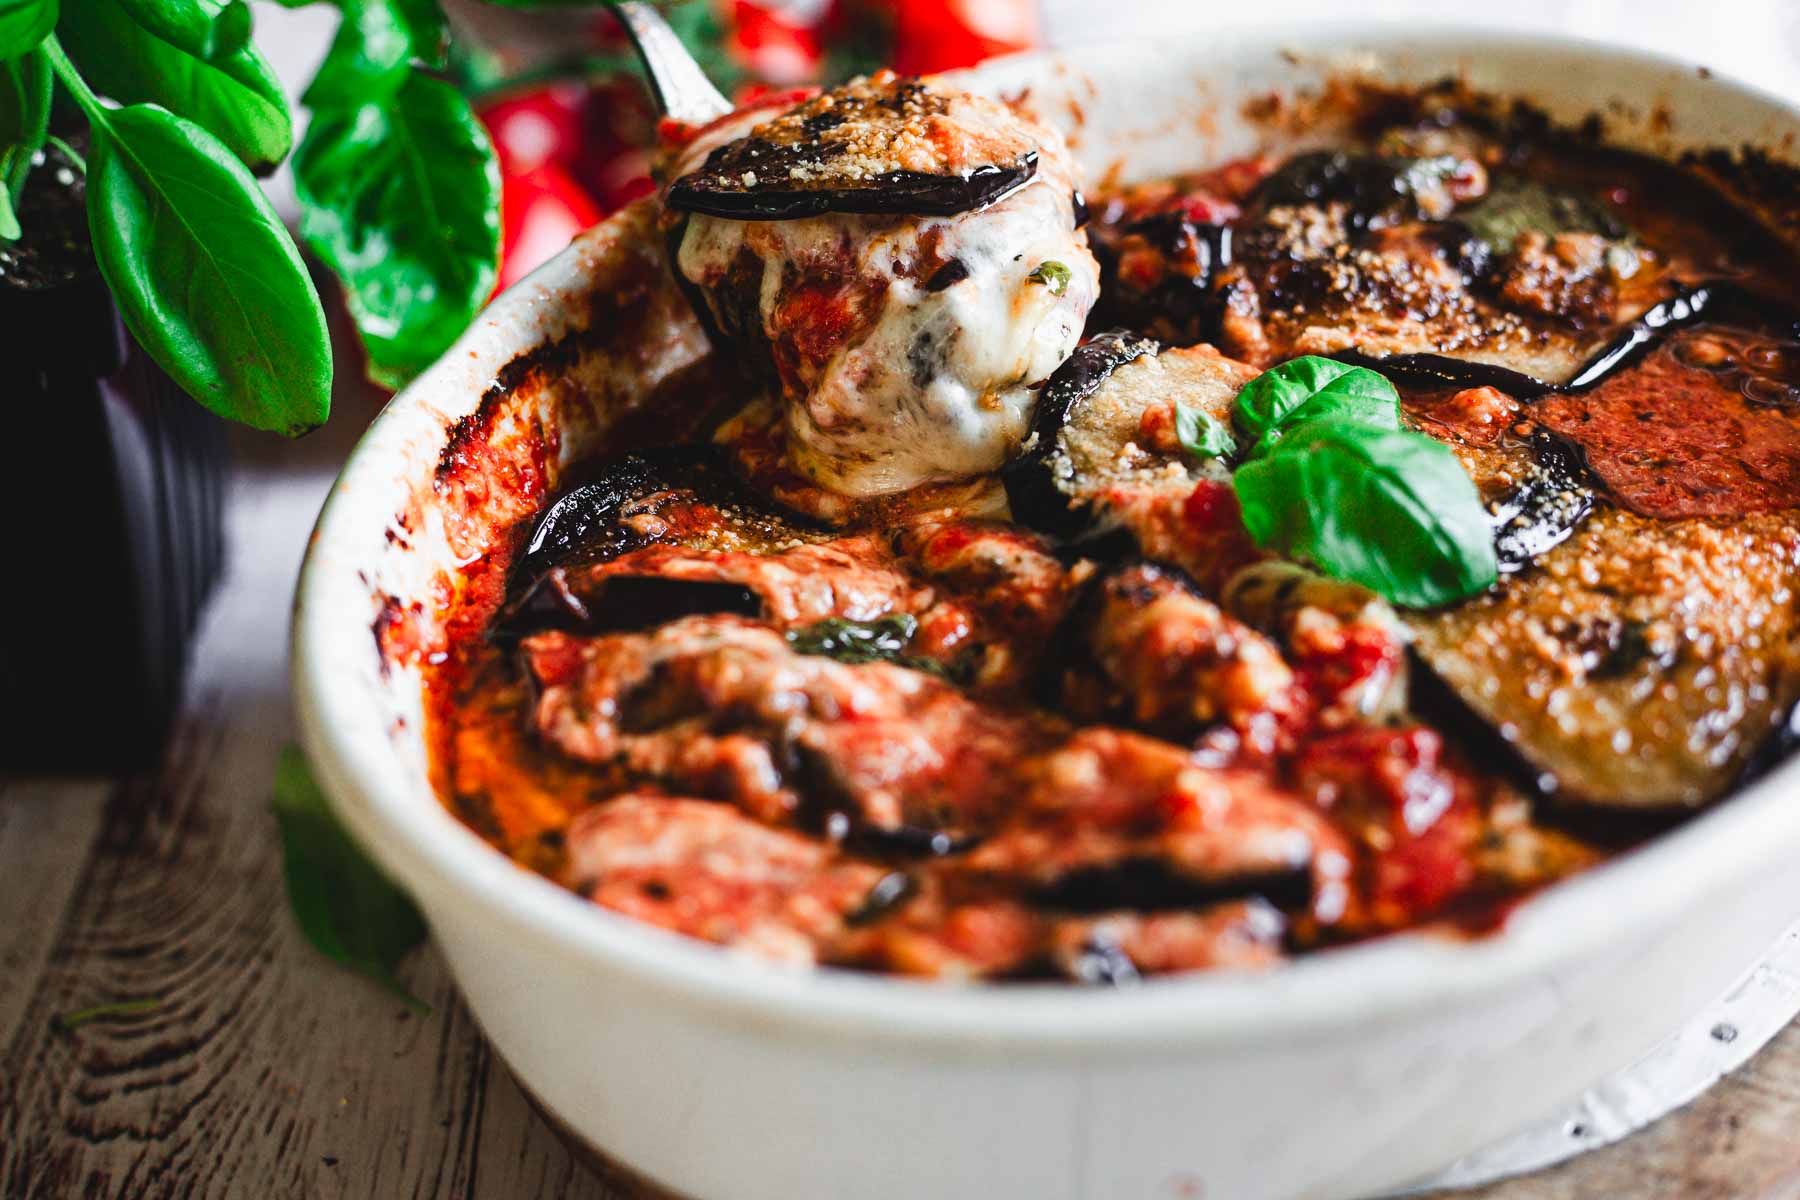 Lifting a spoon of baked Eggplant Parmiagana with basil on top of white napkin, red tomatoes and green basil